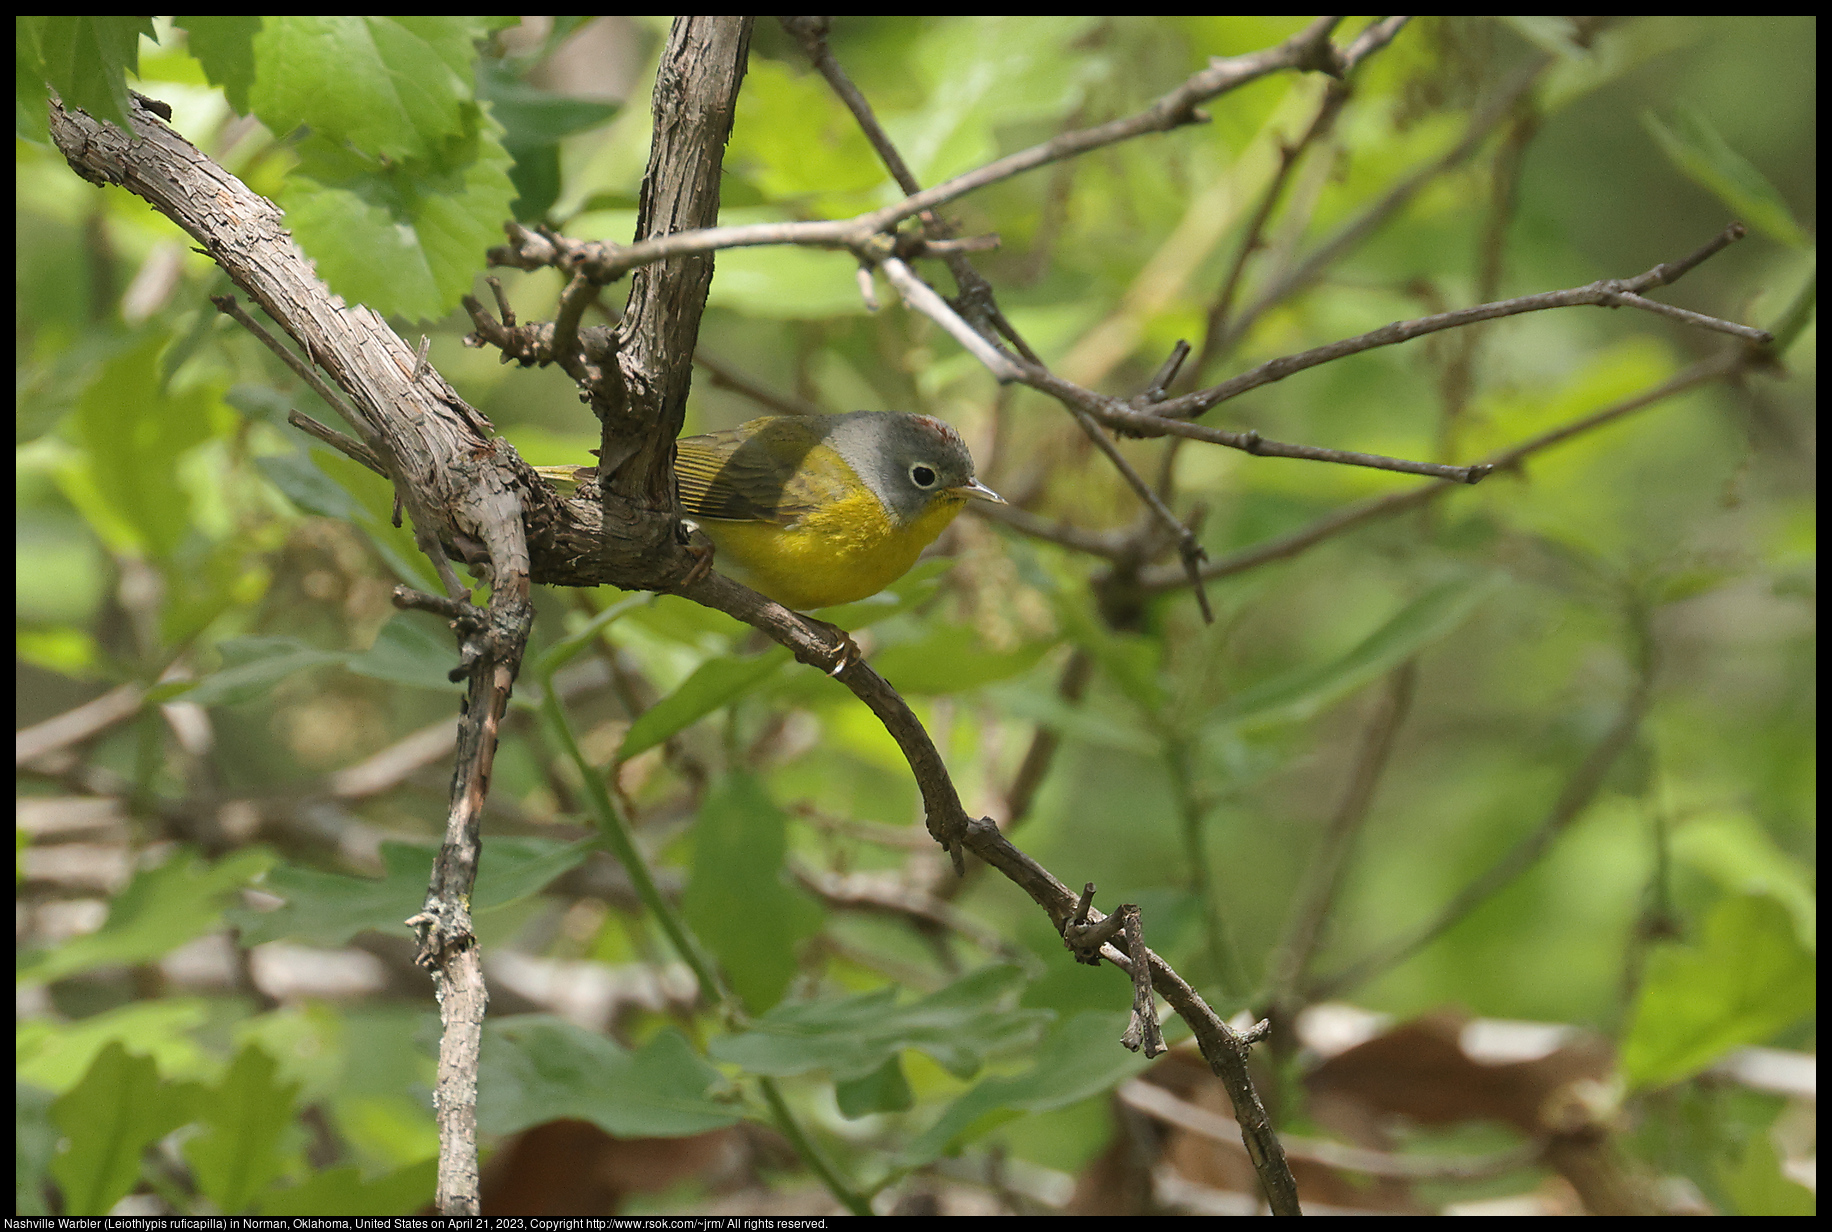 Nashville Warbler (Leiothlypis ruficapilla) in Norman, Oklahoma, United States on April 21, 2023